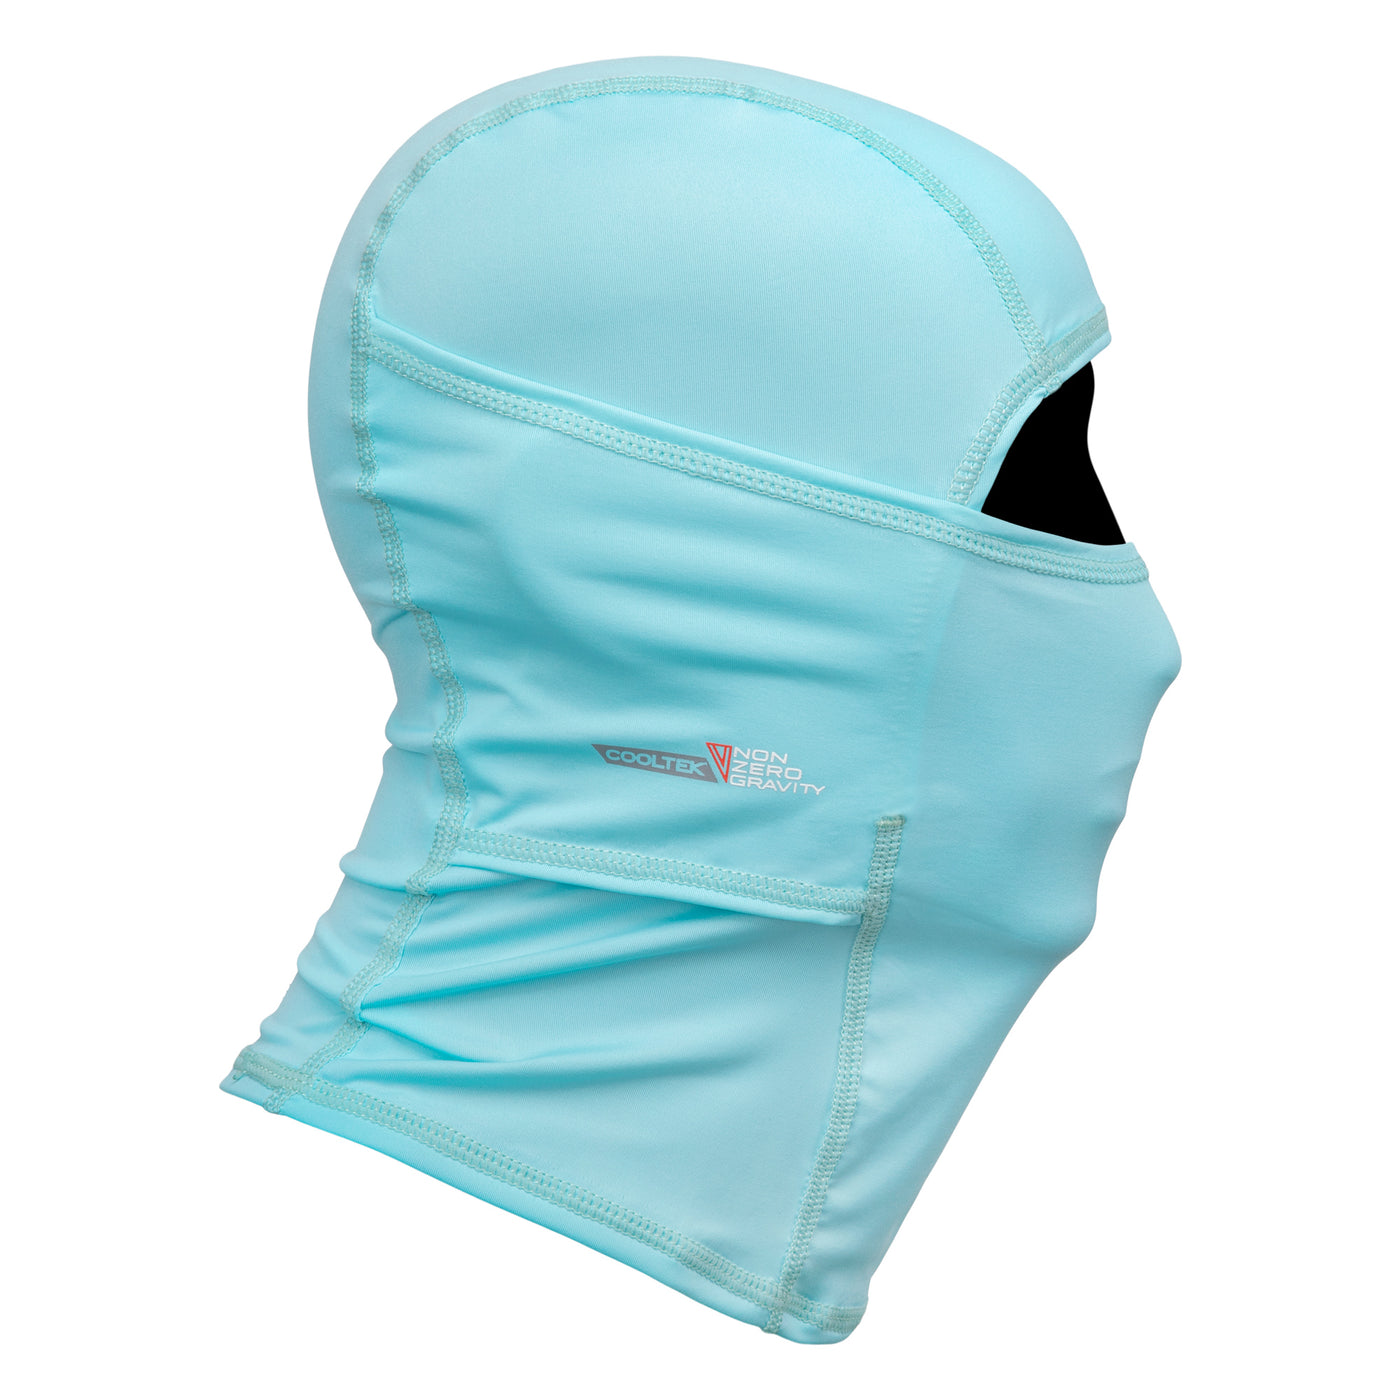 a light blue spandex balaclava to mask and protect your face